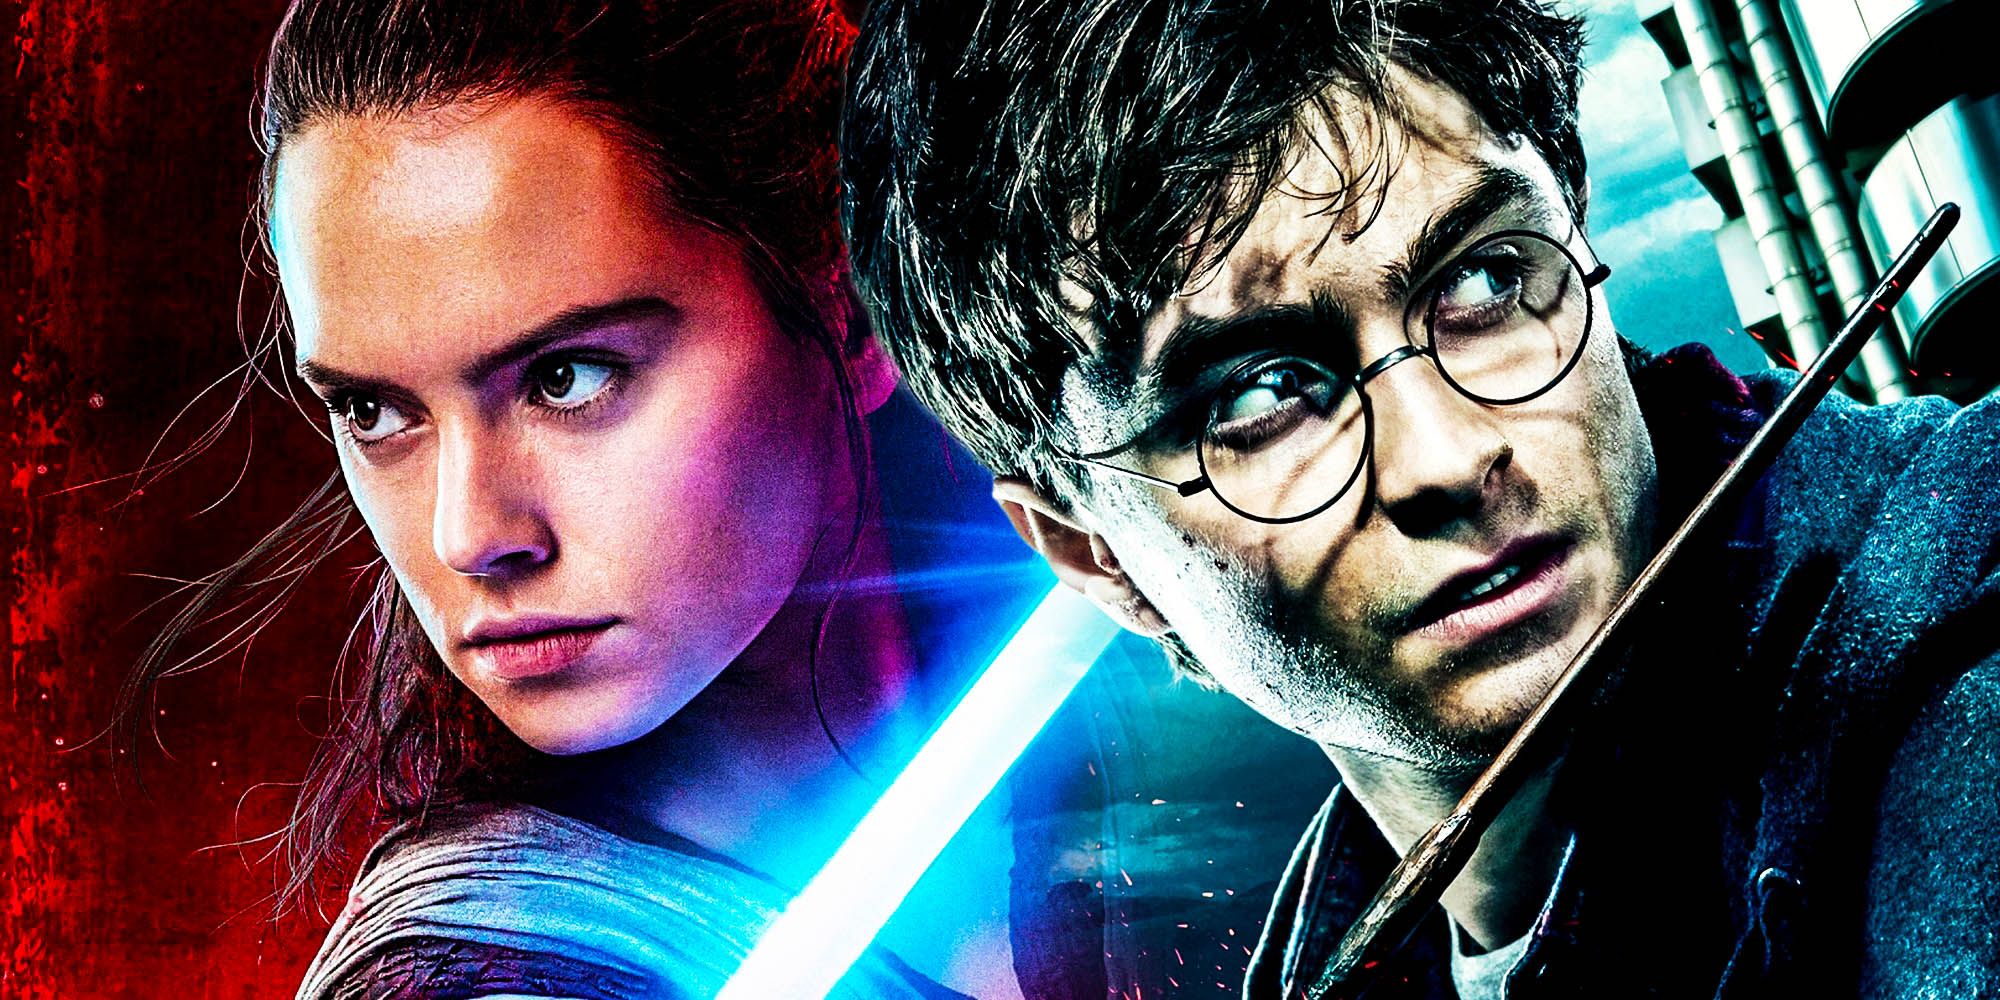 Harry potter spinoff movies have the same problem as star wars Rey Skywalker